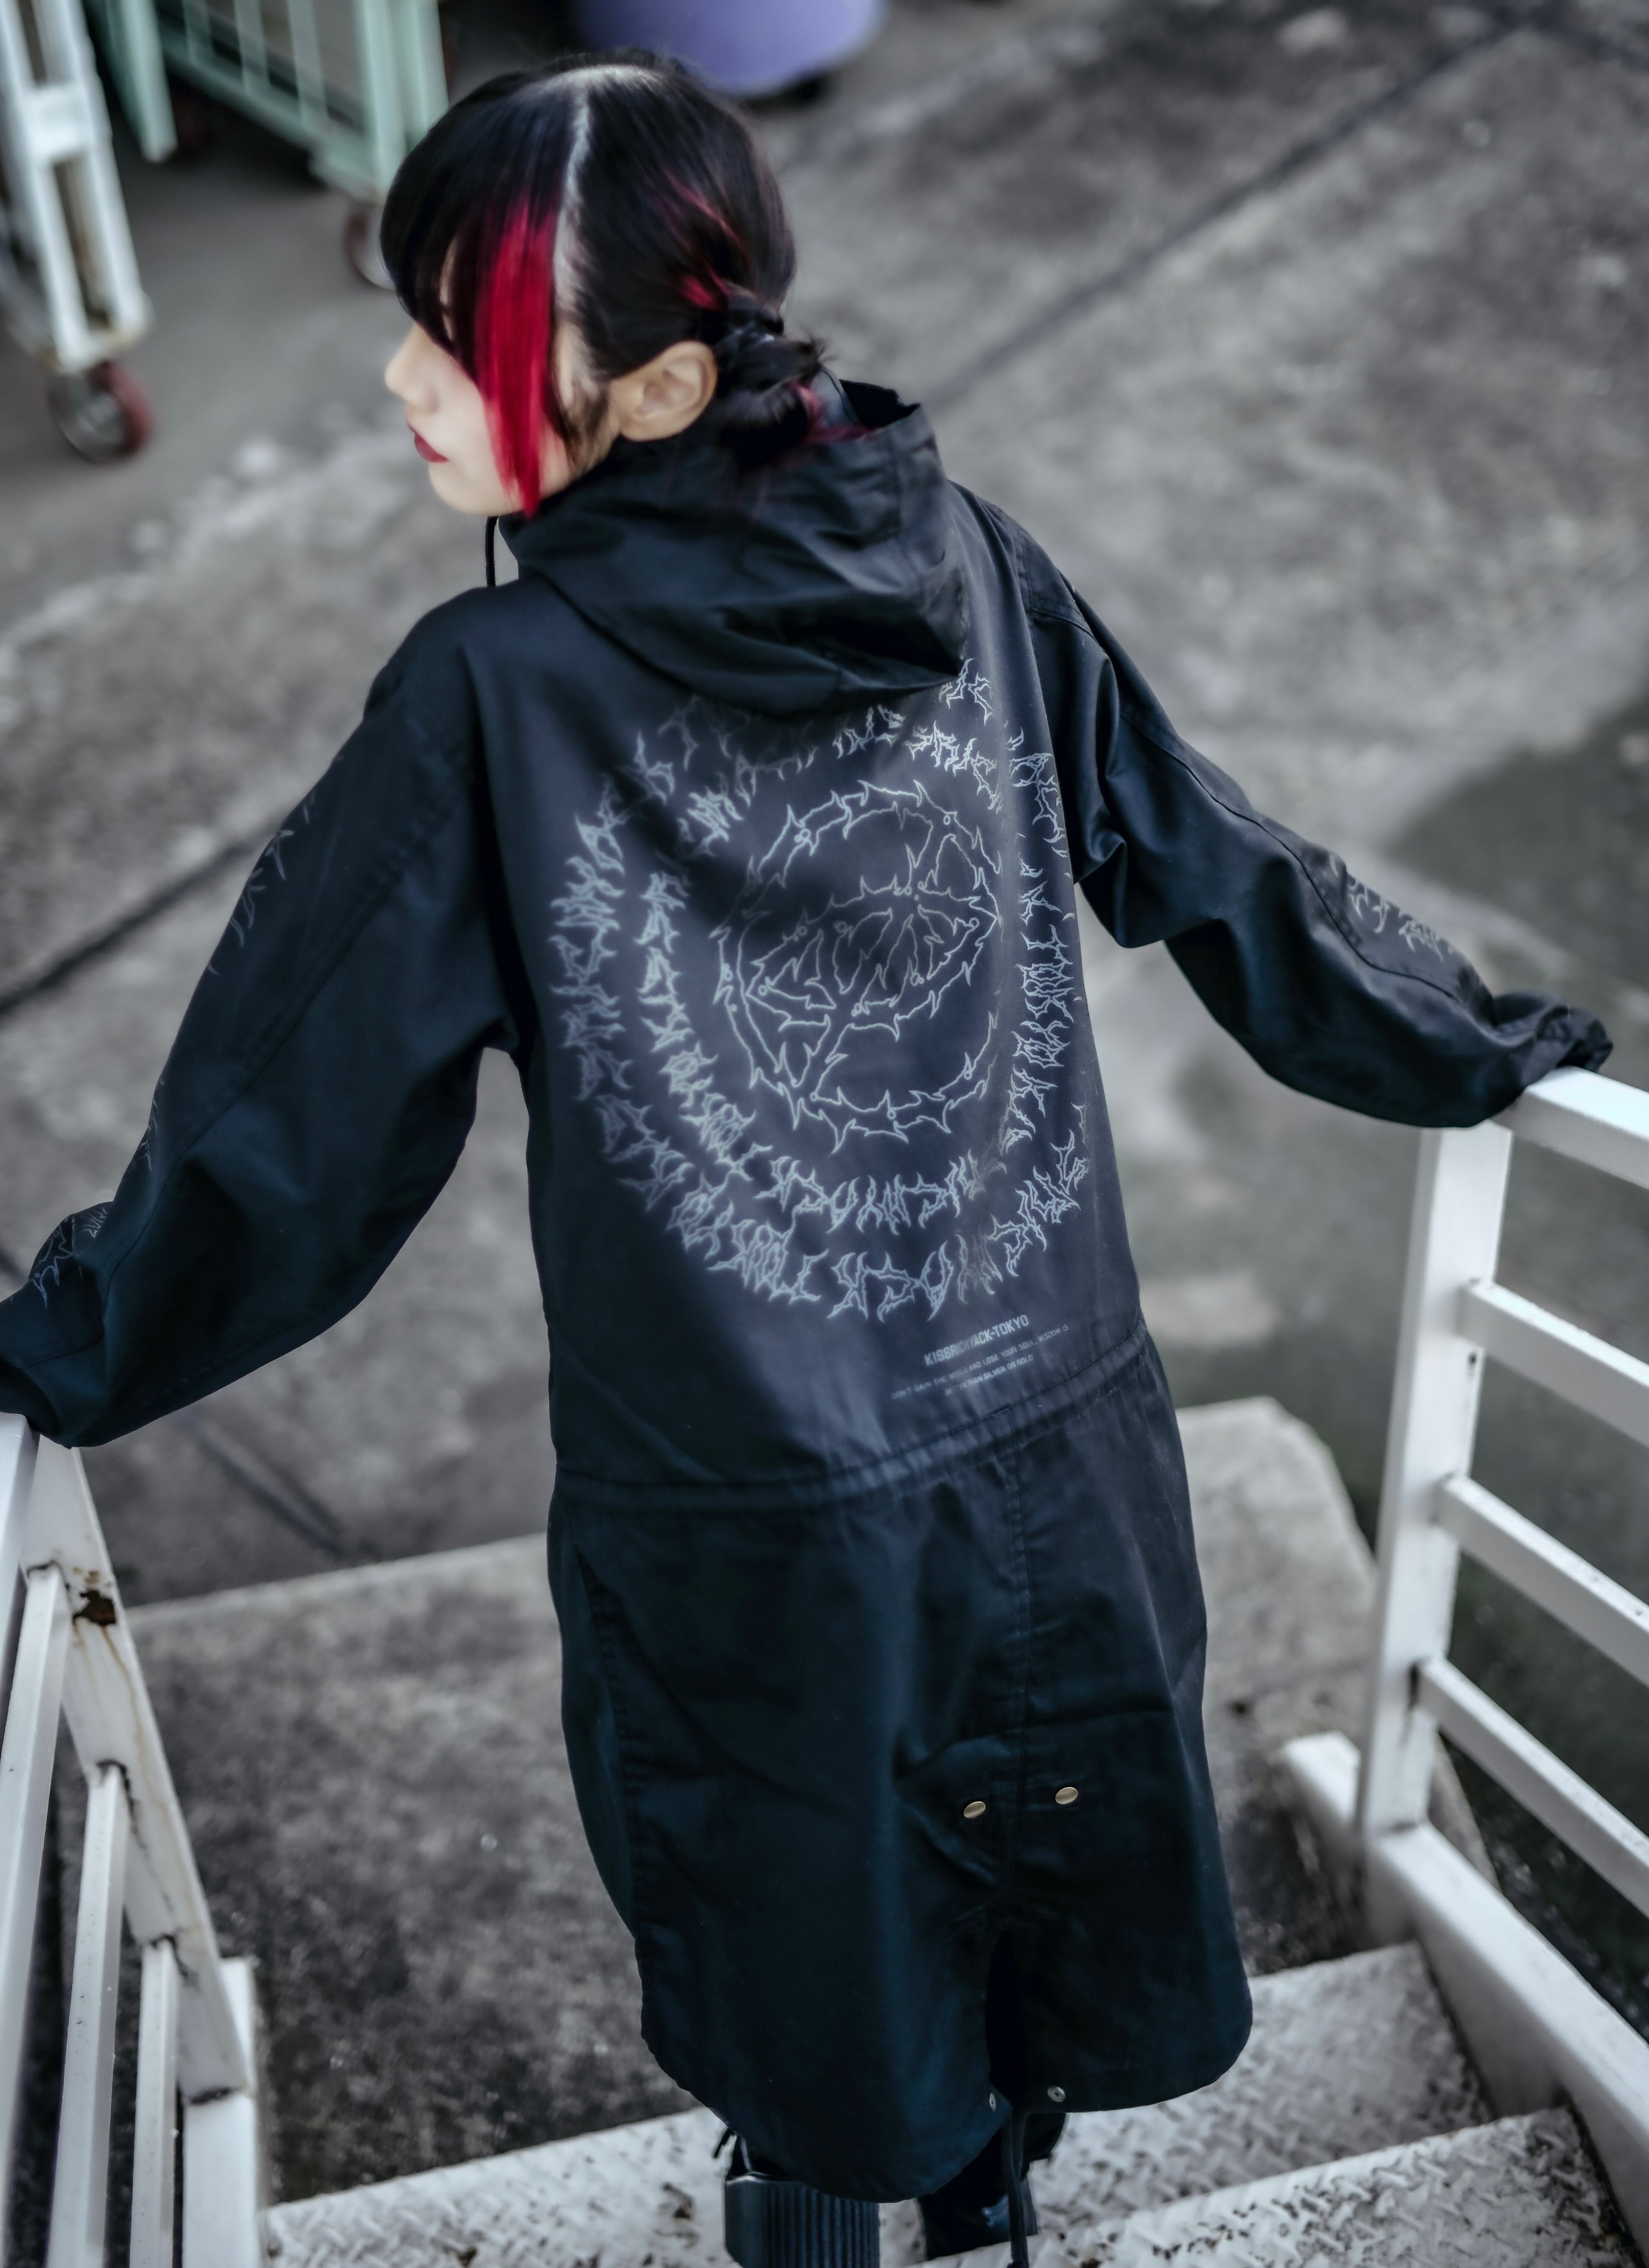 「HARUKO-TO」 | KRY clothing powered by BASE